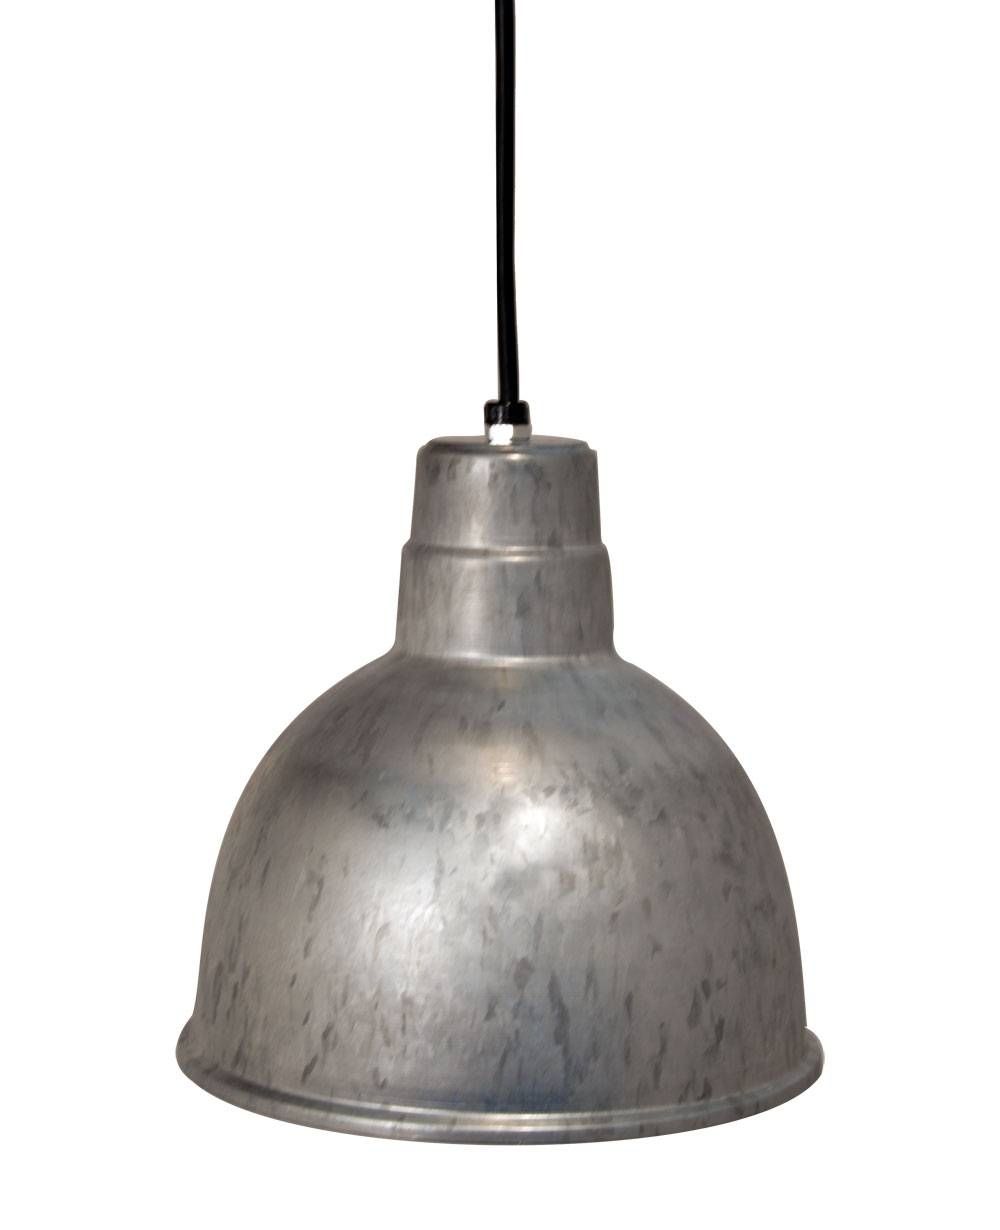 Trend Barn Lighting Pendant 14 About Remodel Track Pendant Lights Throughout Barn Pendant Lights Fixtures (View 5 of 15)